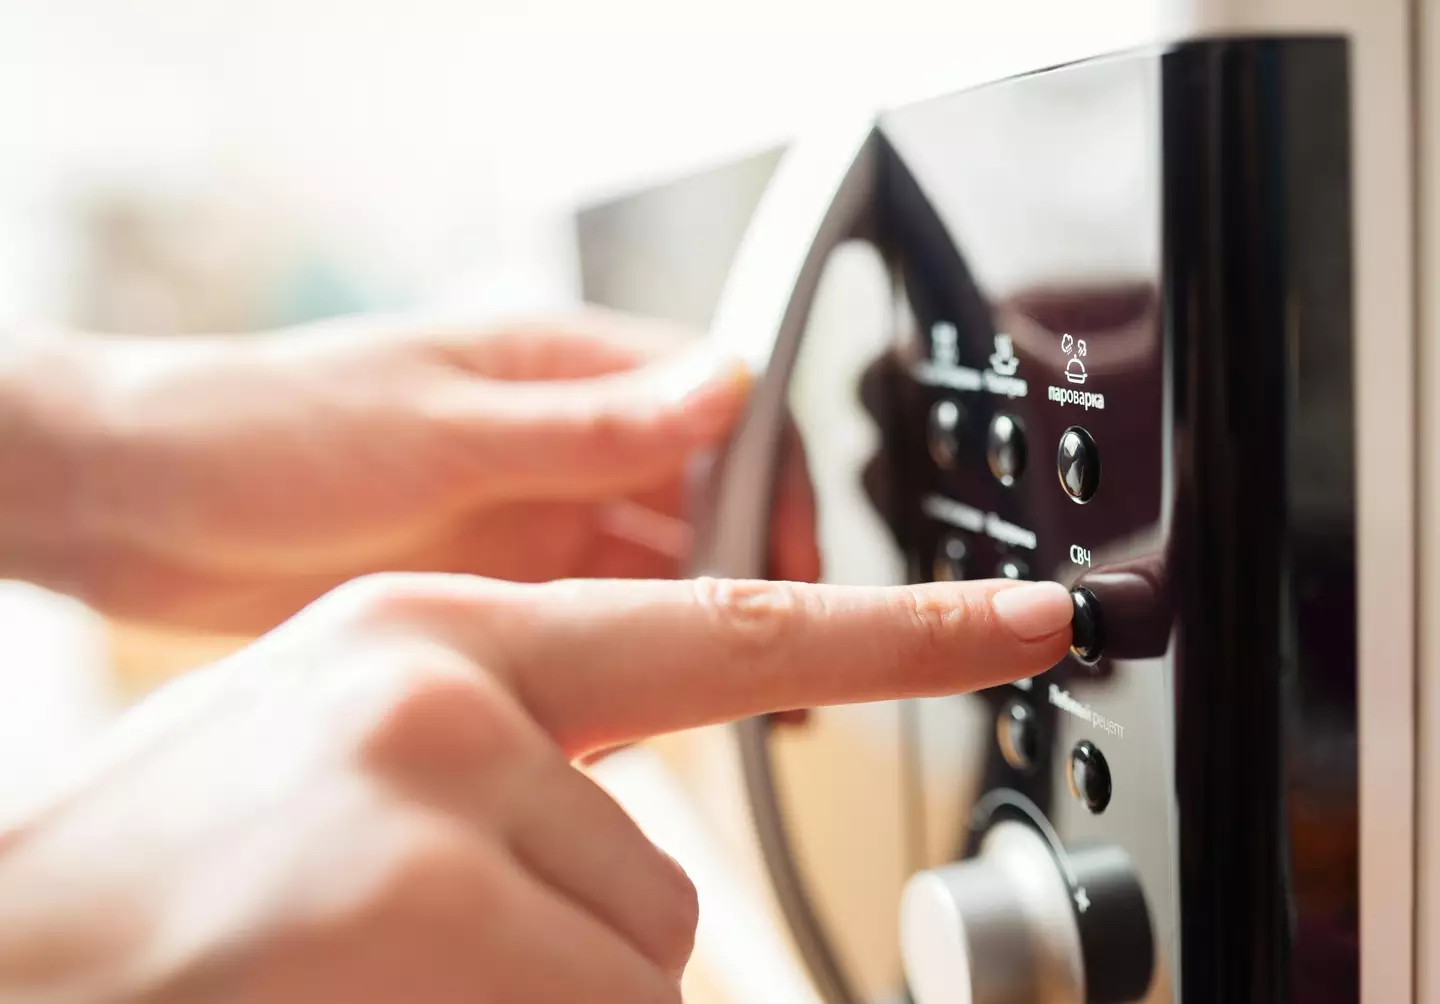 Will you be giving this hack a go next time you give cleaning the microwave a go?